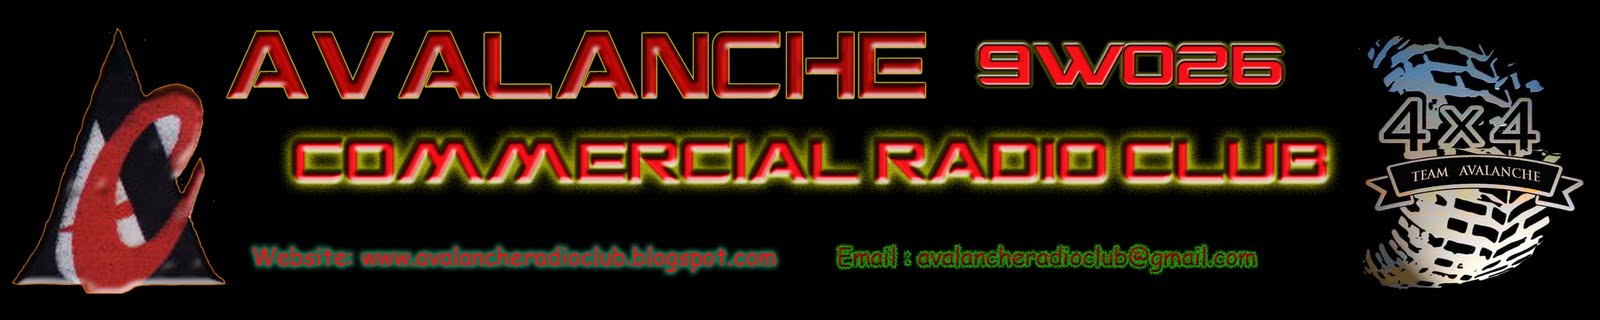 Avalanche Commercial Radio Club